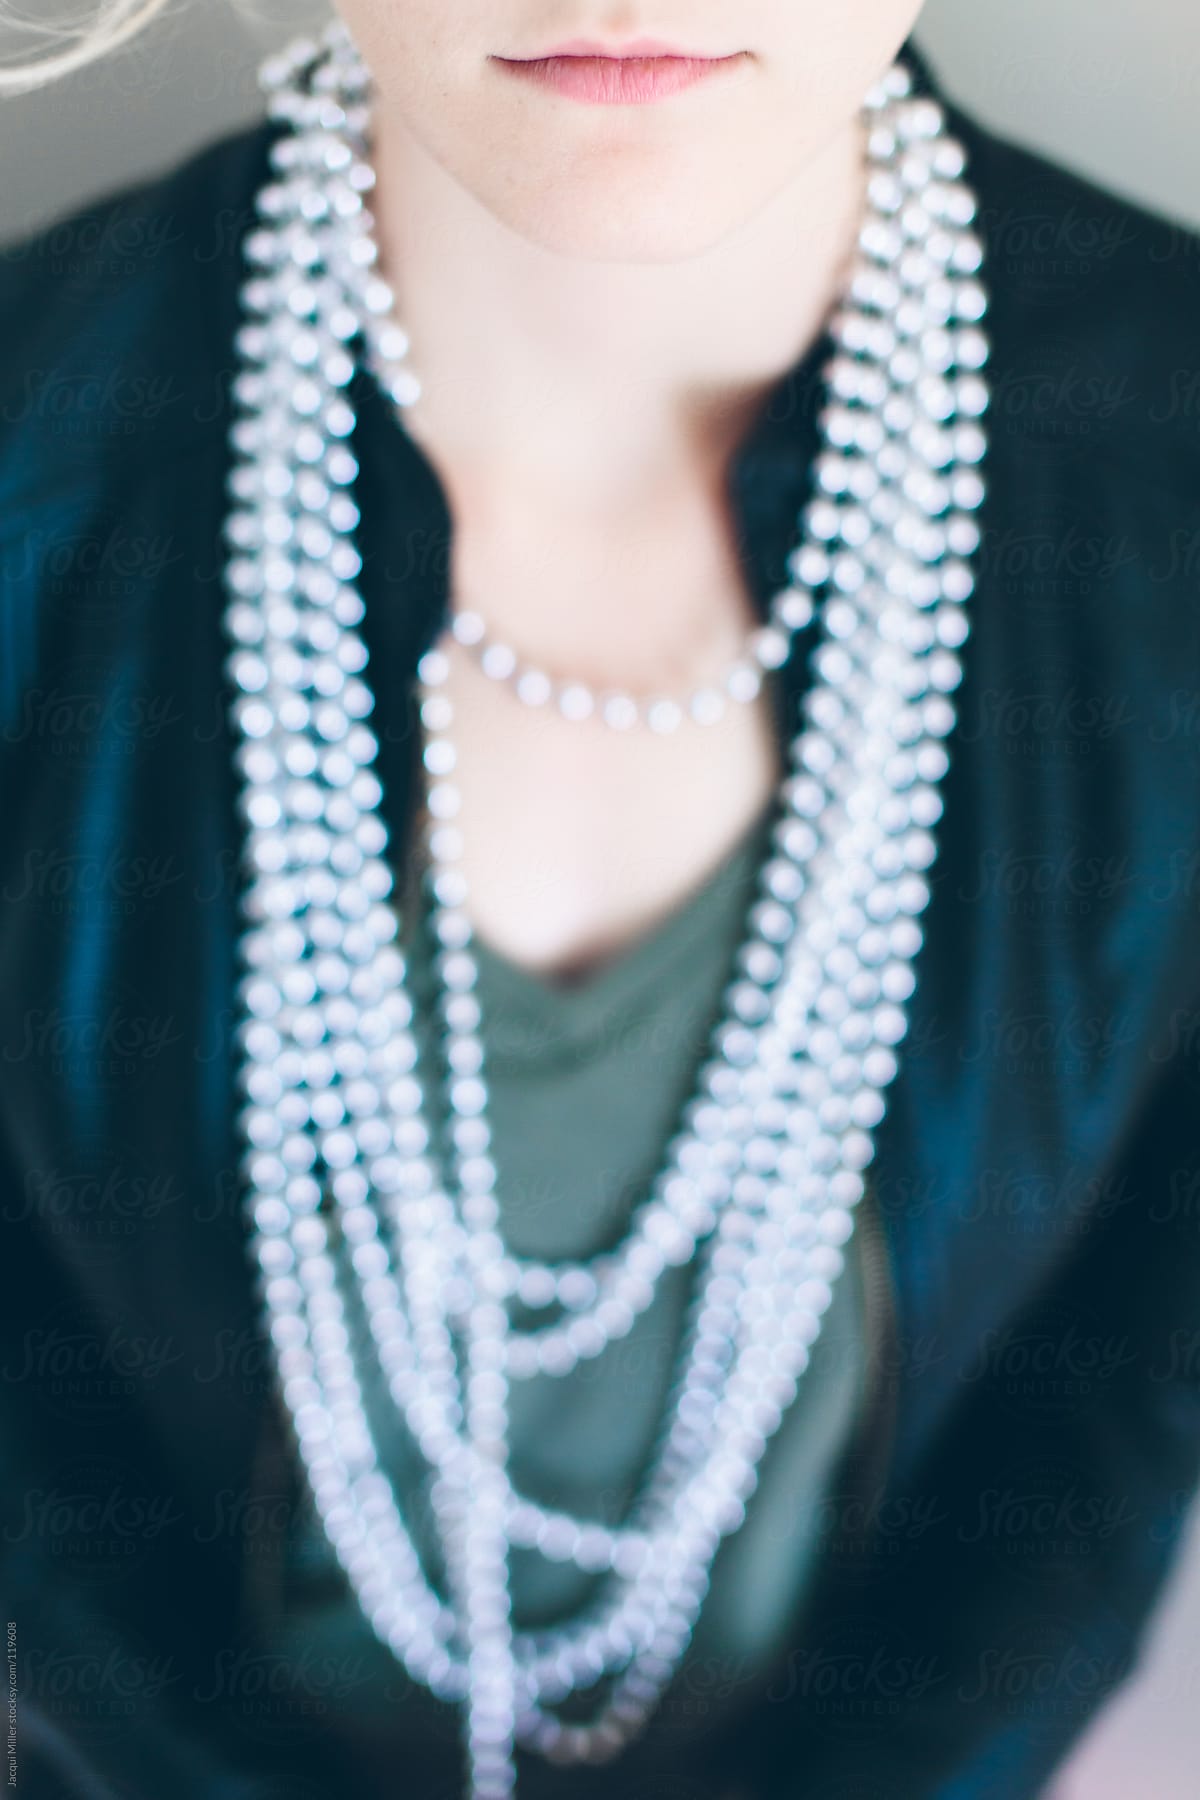 Girl wearing a long string of beads around her neck